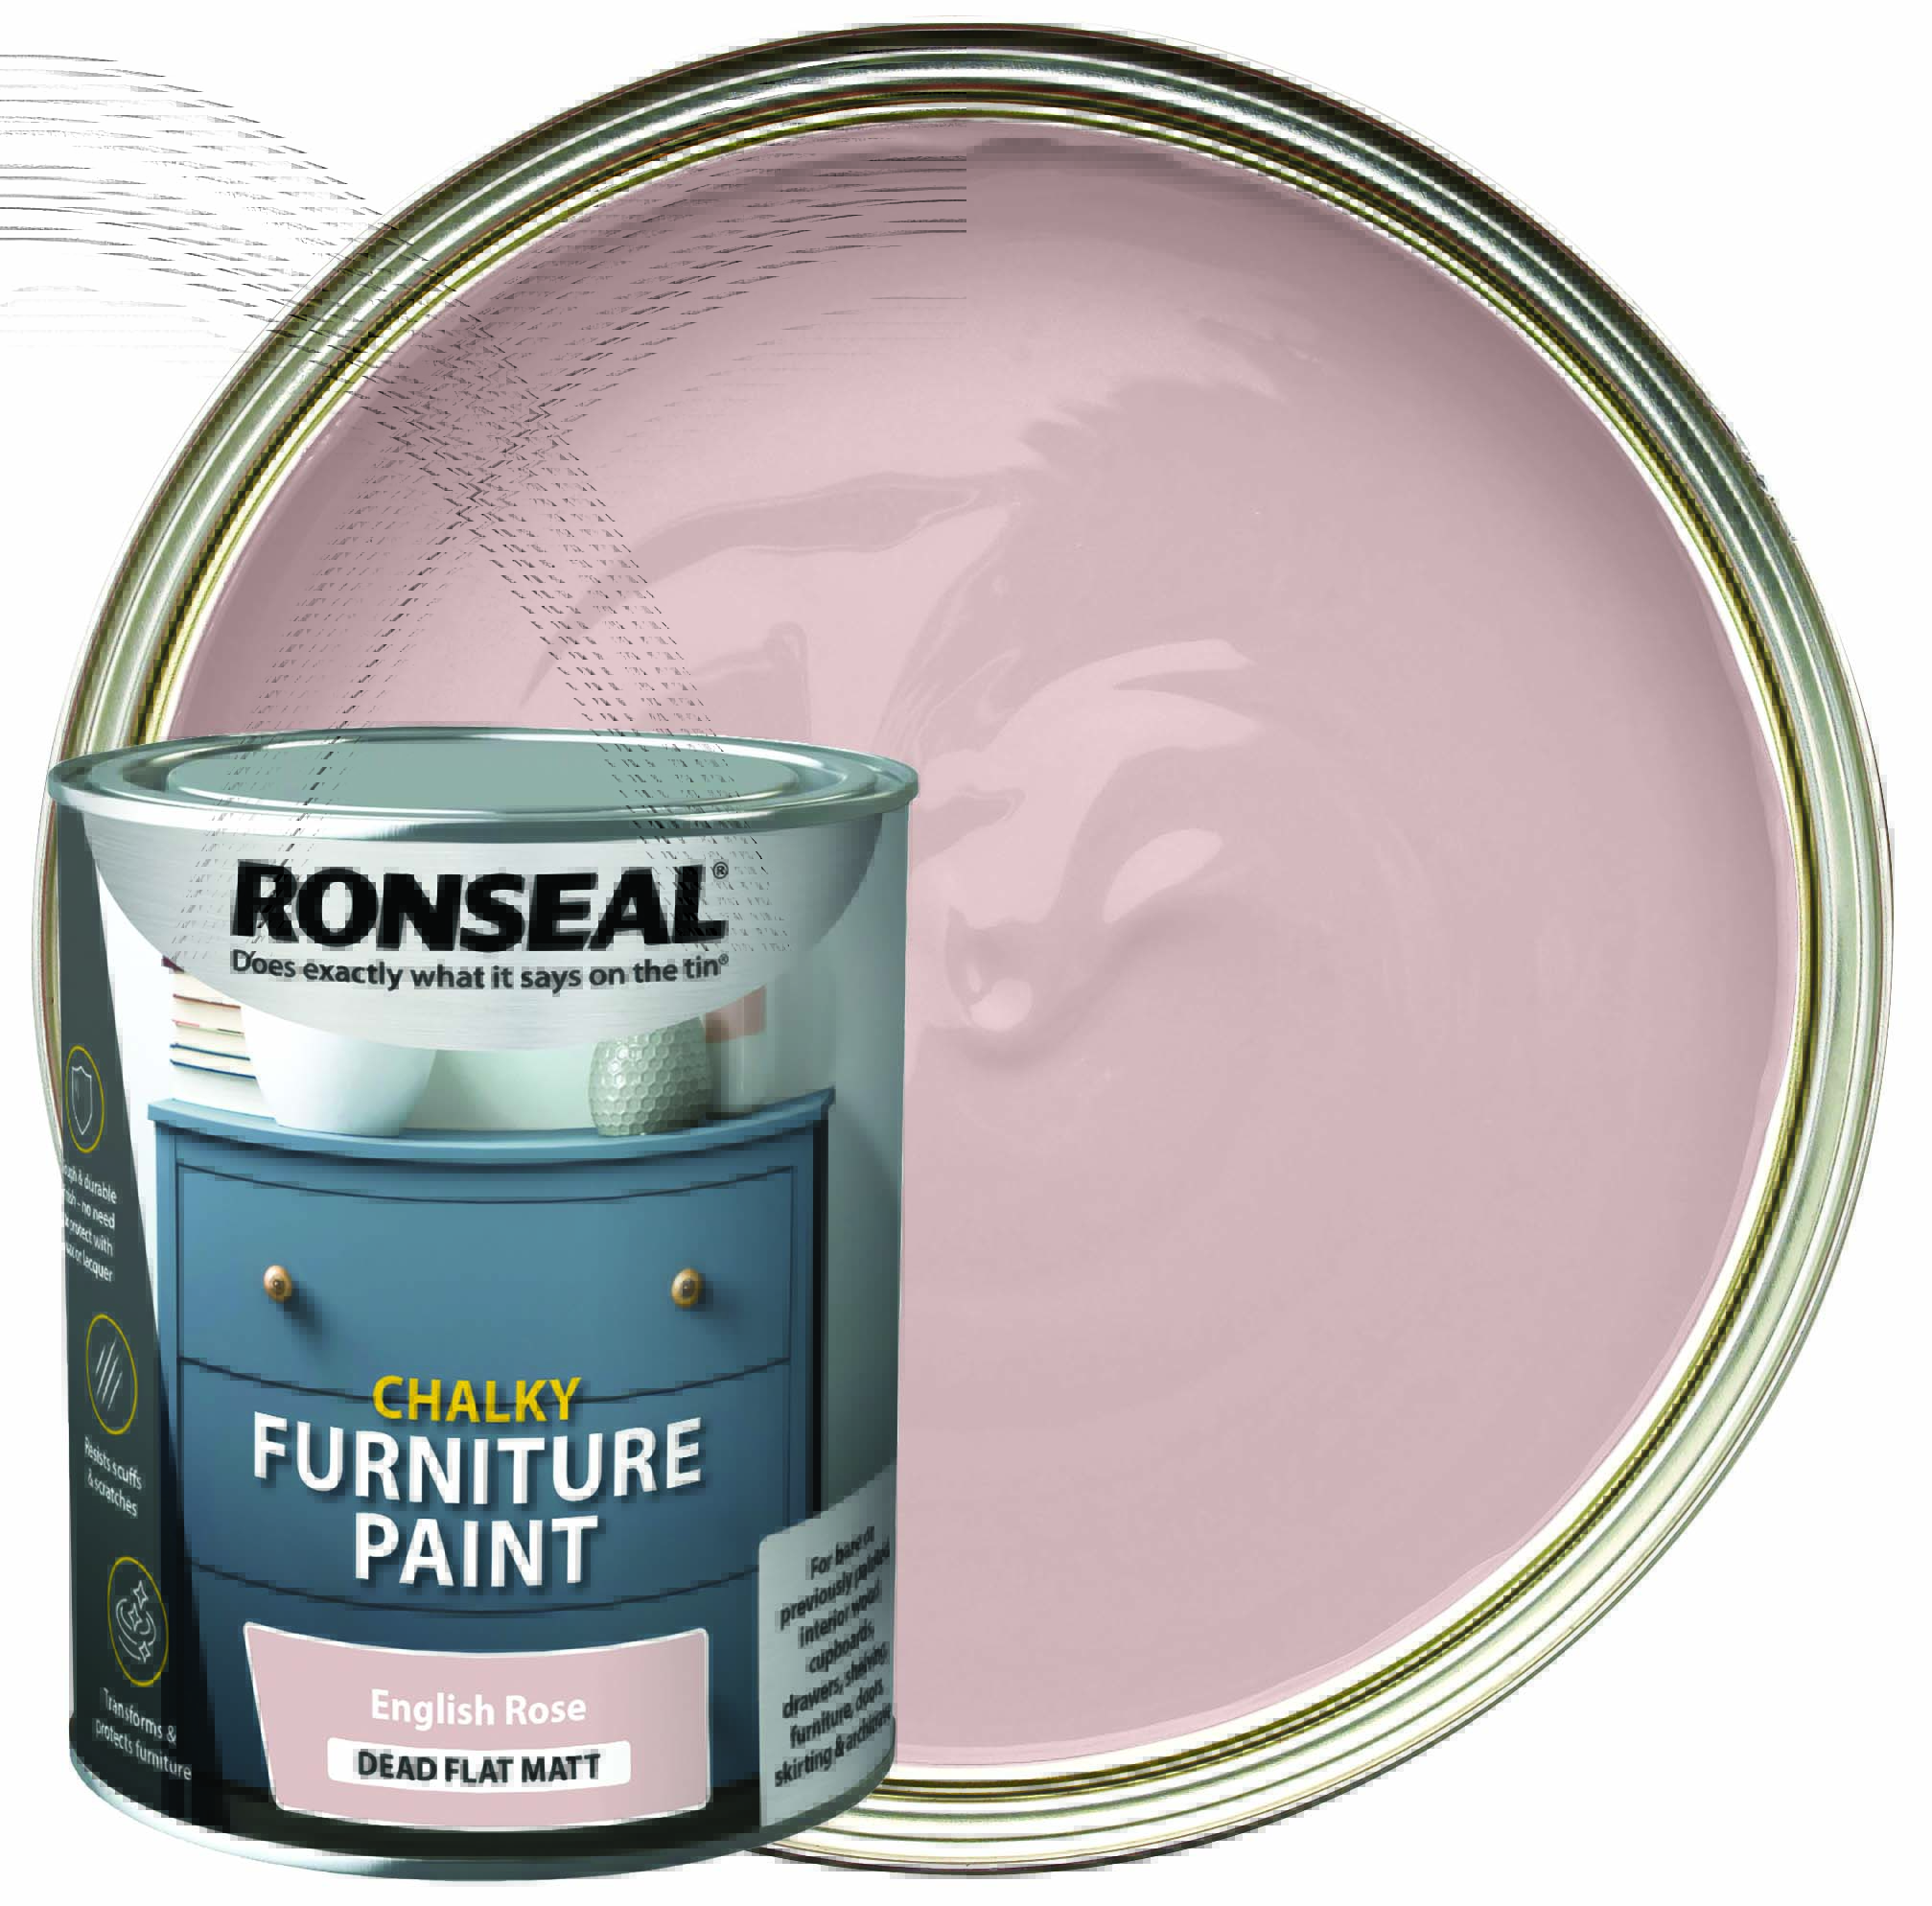 Ronseal Chalky Furniture Paint - English Rose - 750ml